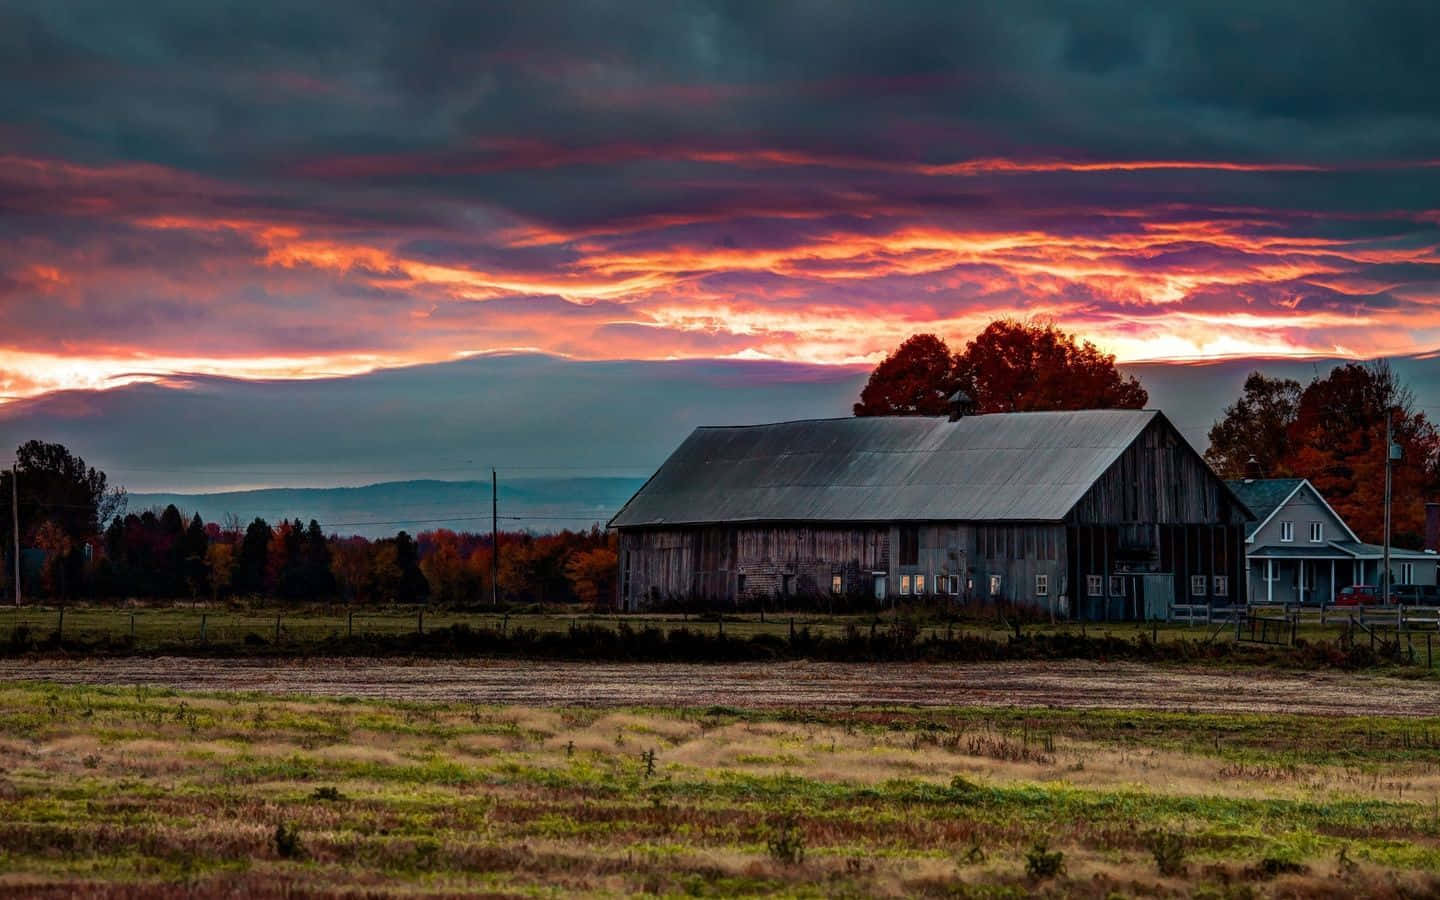 Enjoy the beauty of nature with this gorgeous sunset view of a barn.